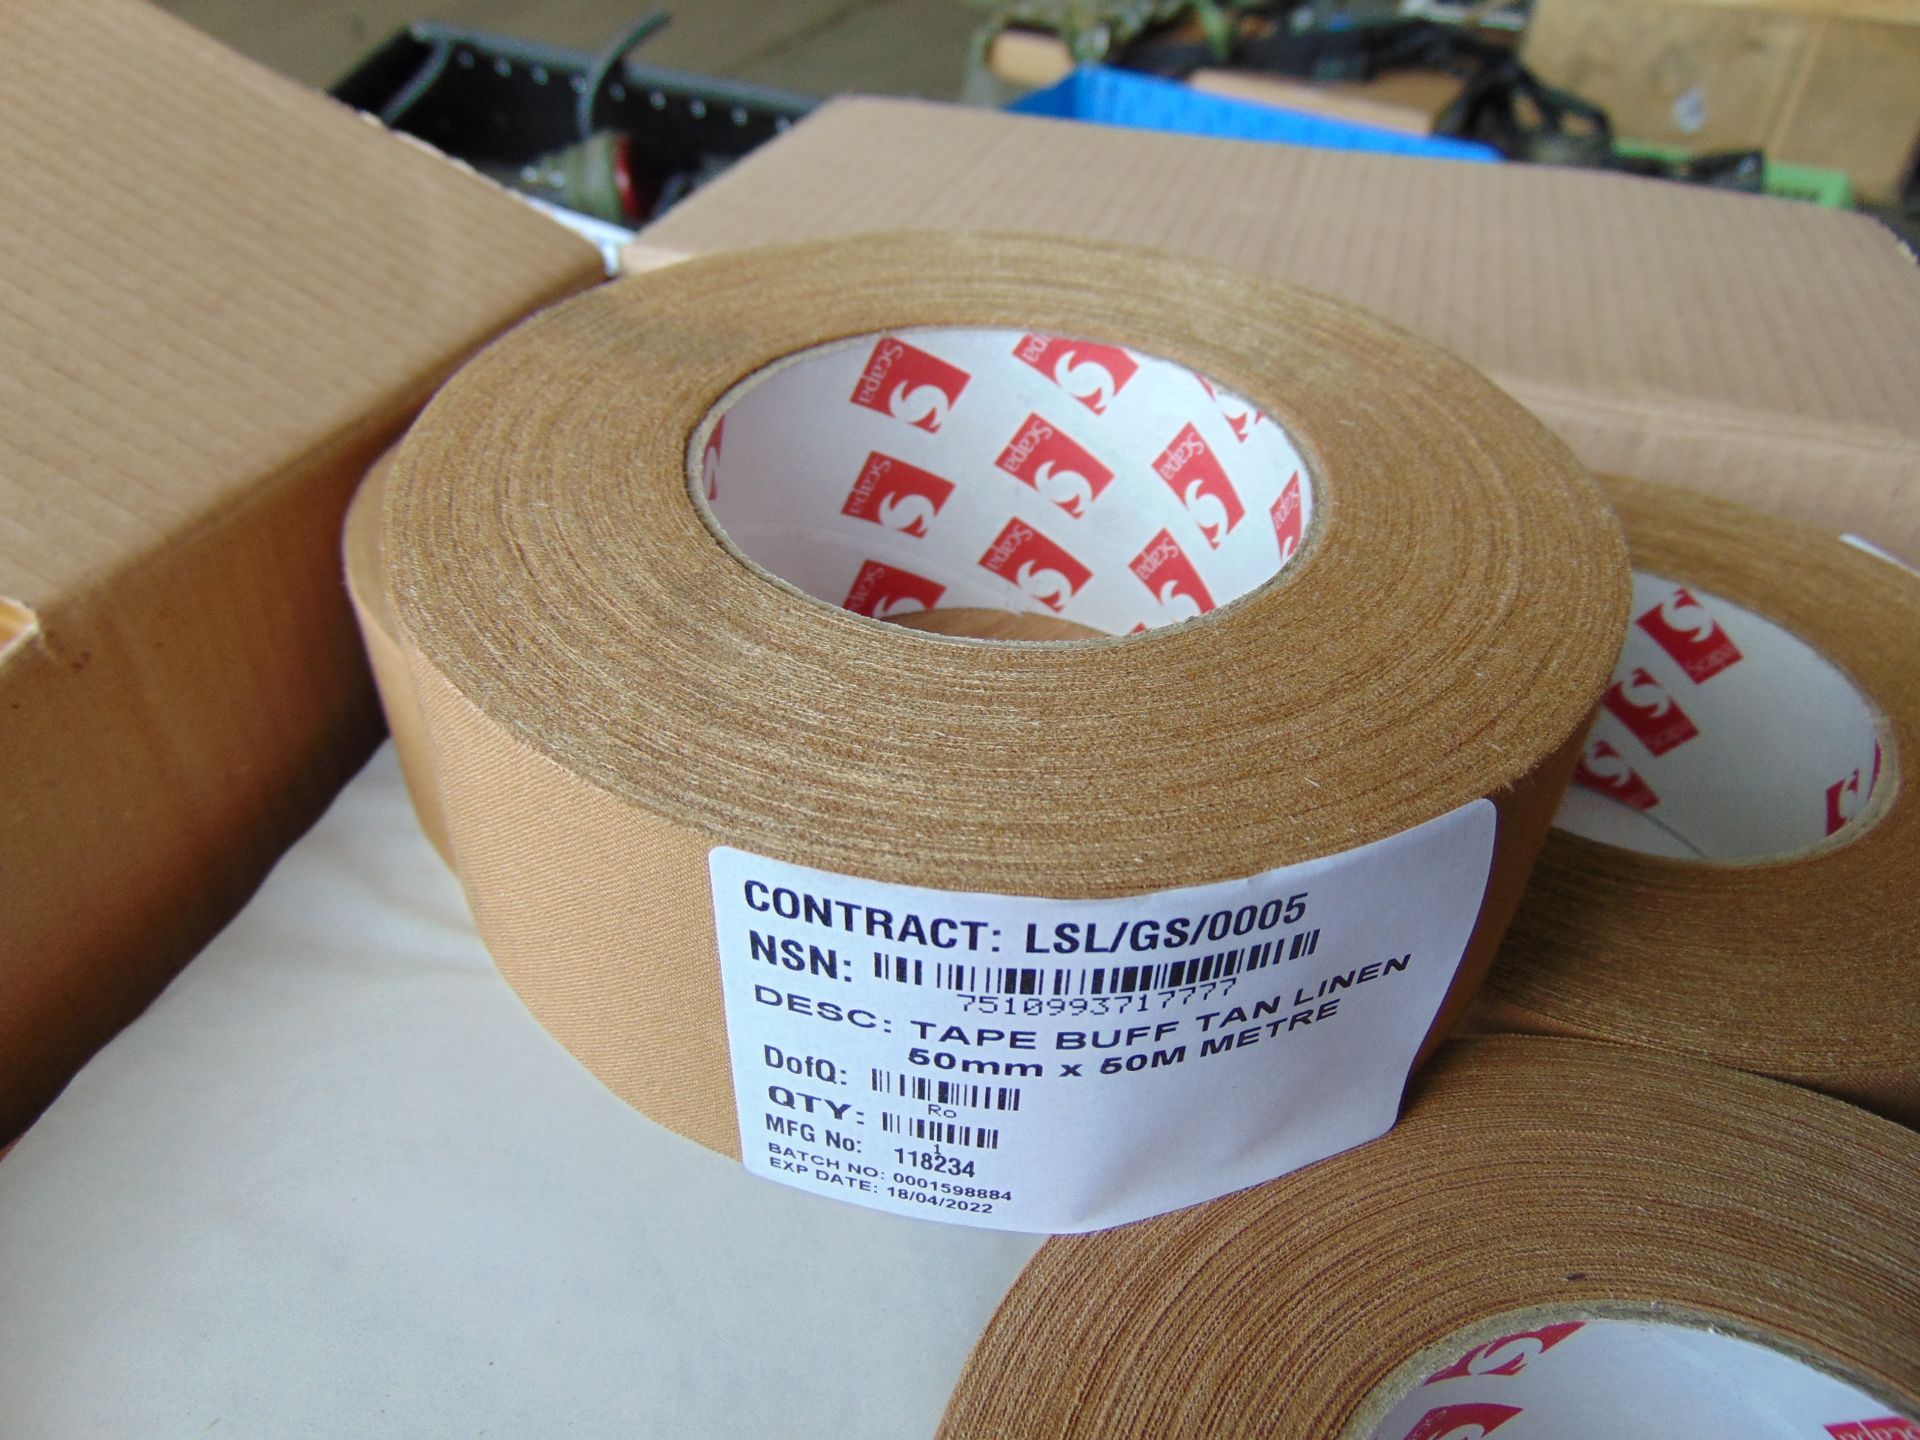 New Unissued 16 Rolls Scapa Tape Butt Linen 50mm x 50m / Roll Cloth Tape Adessive - Image 2 of 4